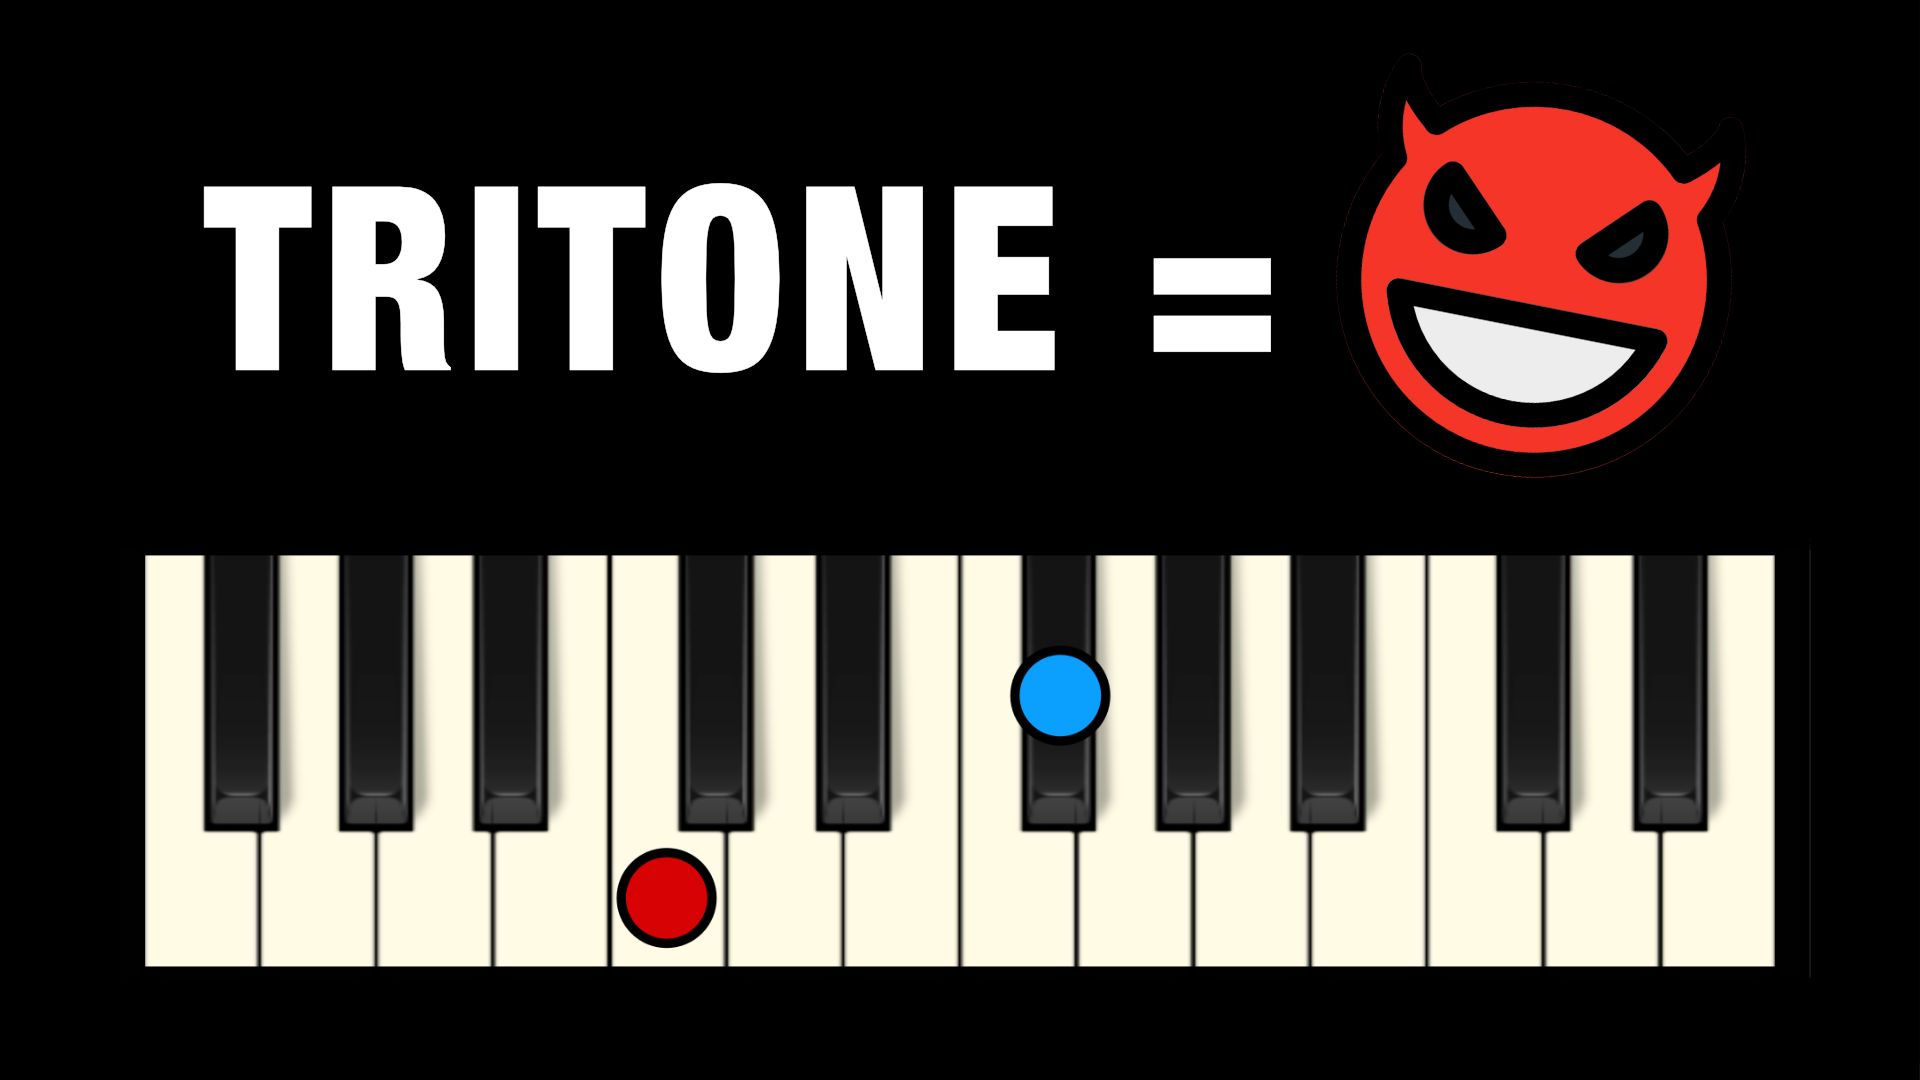 https://professionalcomposers.com/wp-content/uploads/2020/10/The-Tritone-The-Devil-of-Music.png